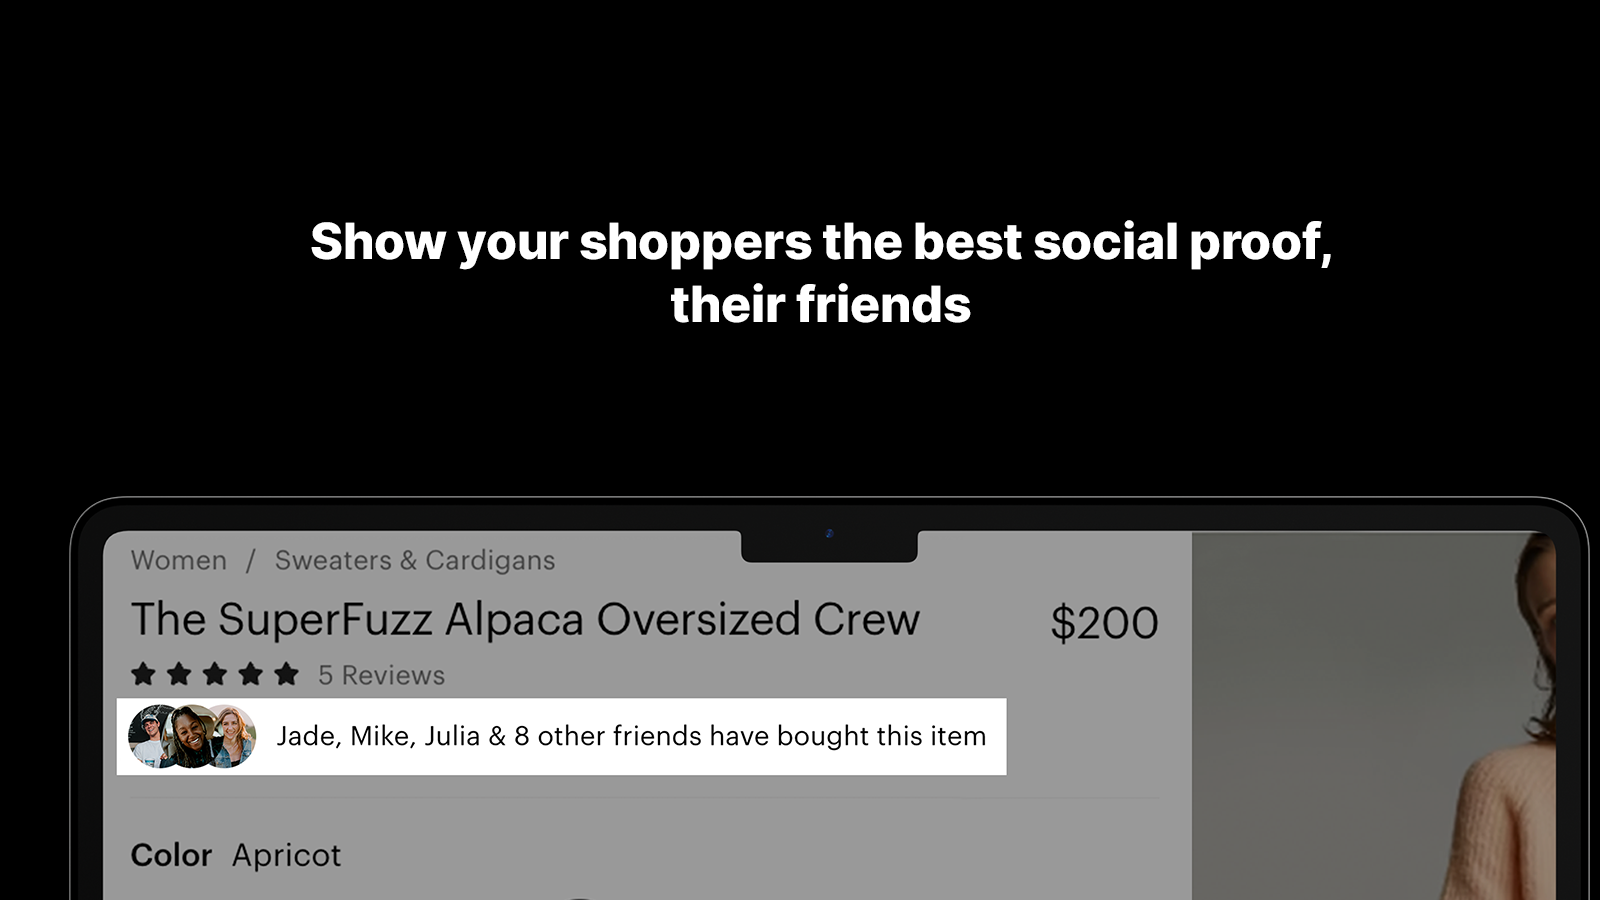 Show your shoppers the best social proof, their friends